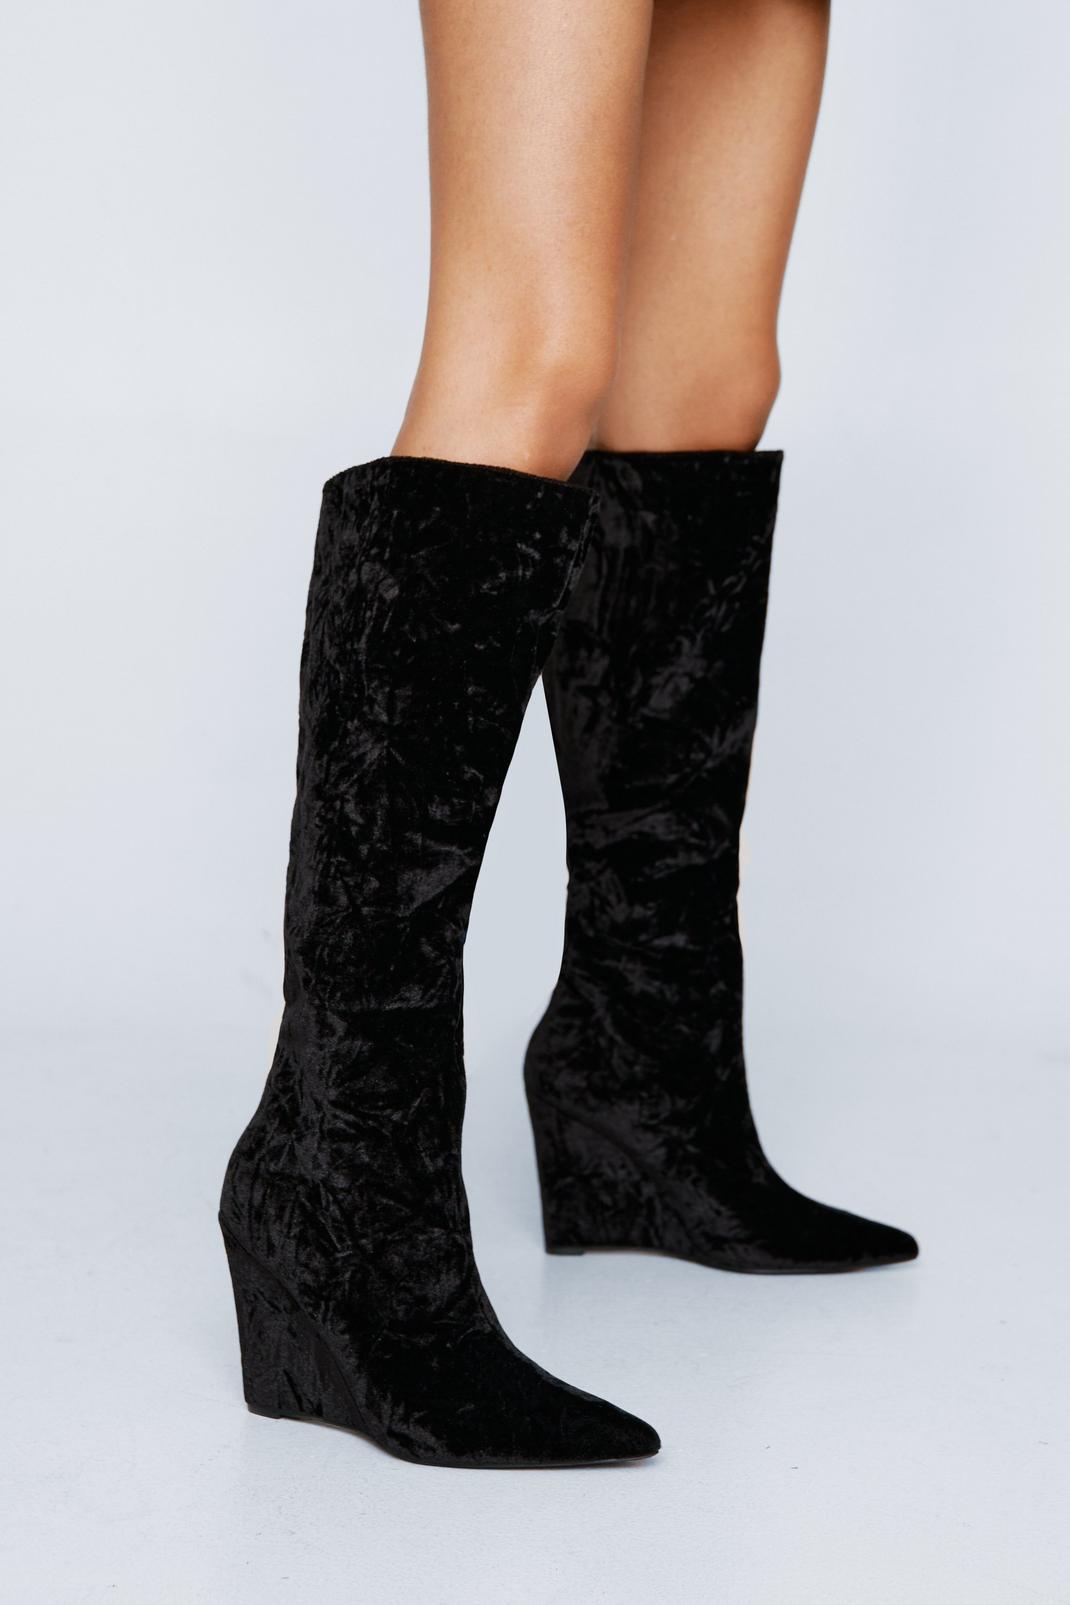 Labor Making Annotate Velvet Pointed Toe Wedge Knee High Boot | Nasty Gal